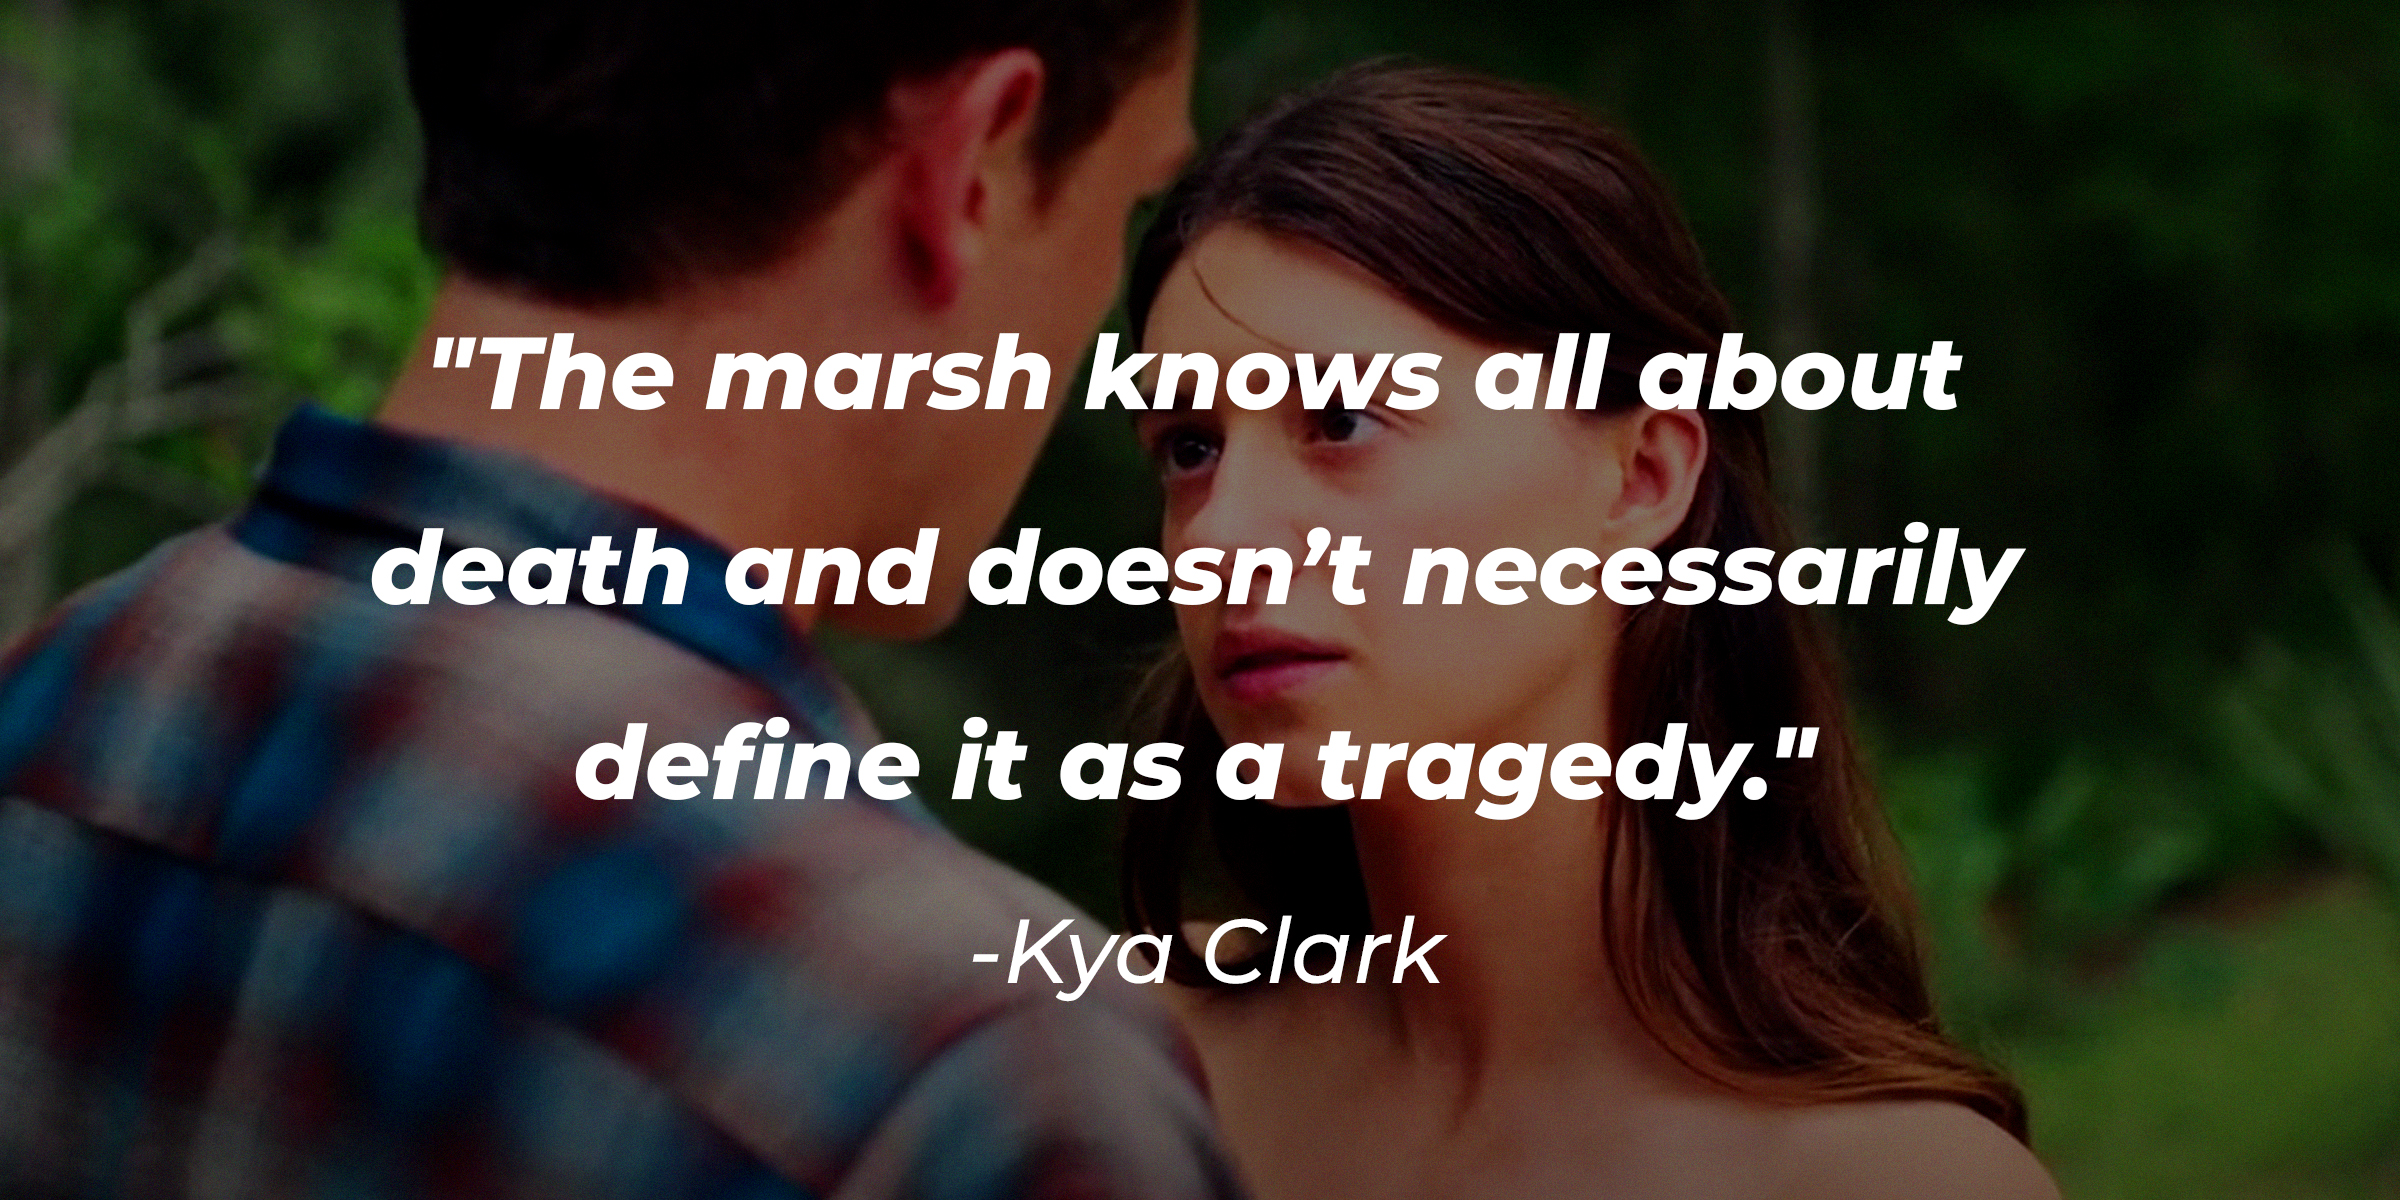 Kya Clark with her quote: "The marsh knows all about death and doesn’t necessarily define it as a tragedy." │Source: facebook.com/CrawdadsMovie